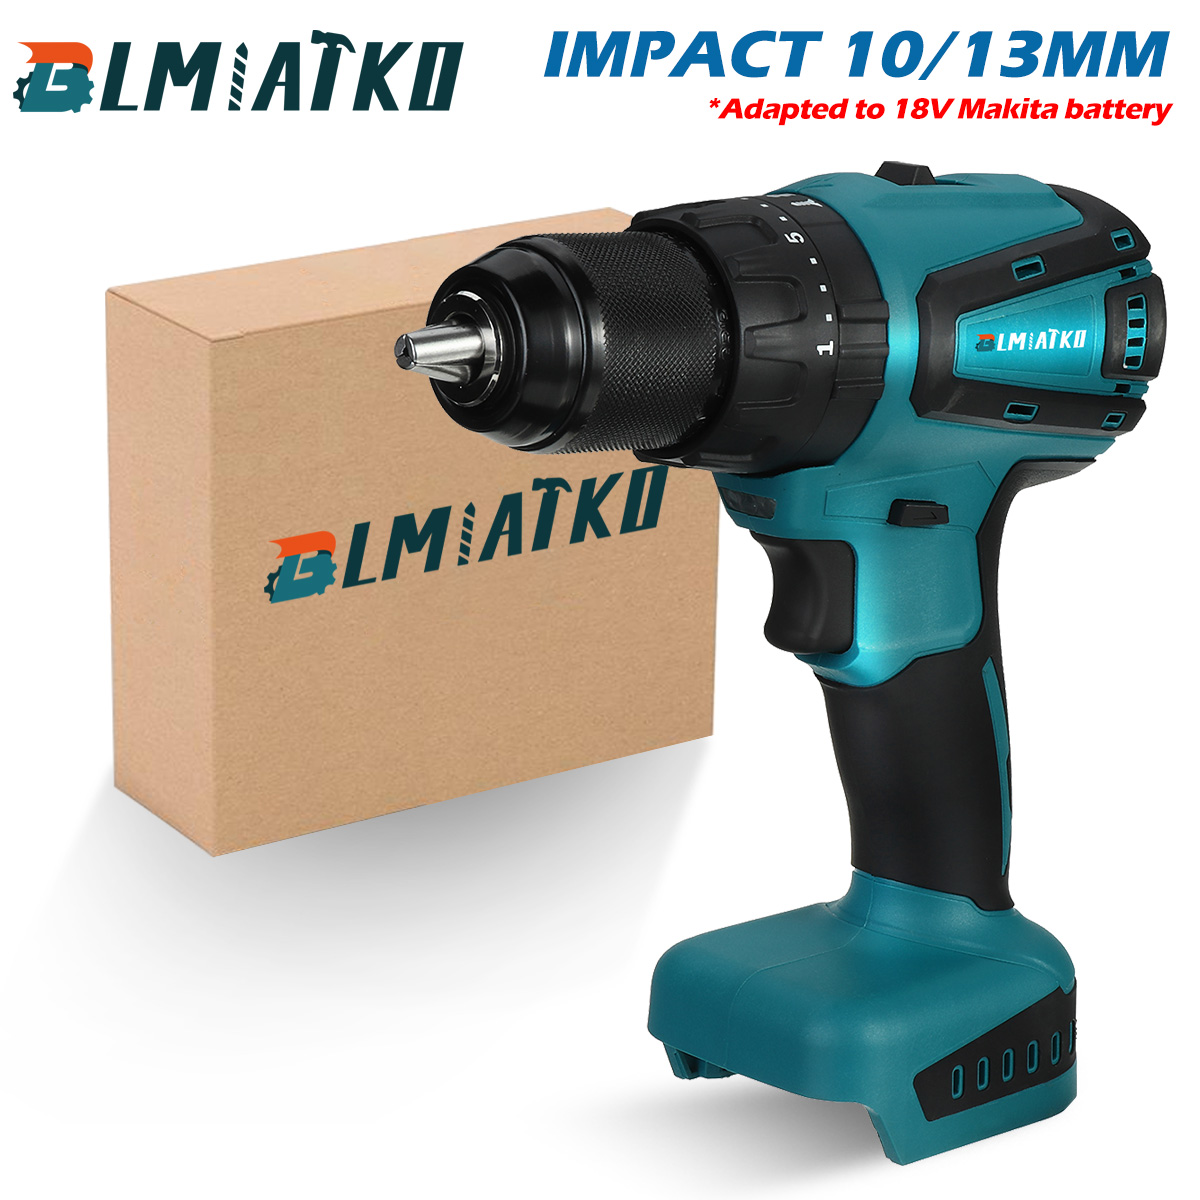 BLMIATKO-18V-2-Speed-Brushless-Impact-Drill-1013mm-Chuck-Rechargeable-Electric-Screwdriver-for-Makit-1759793-1